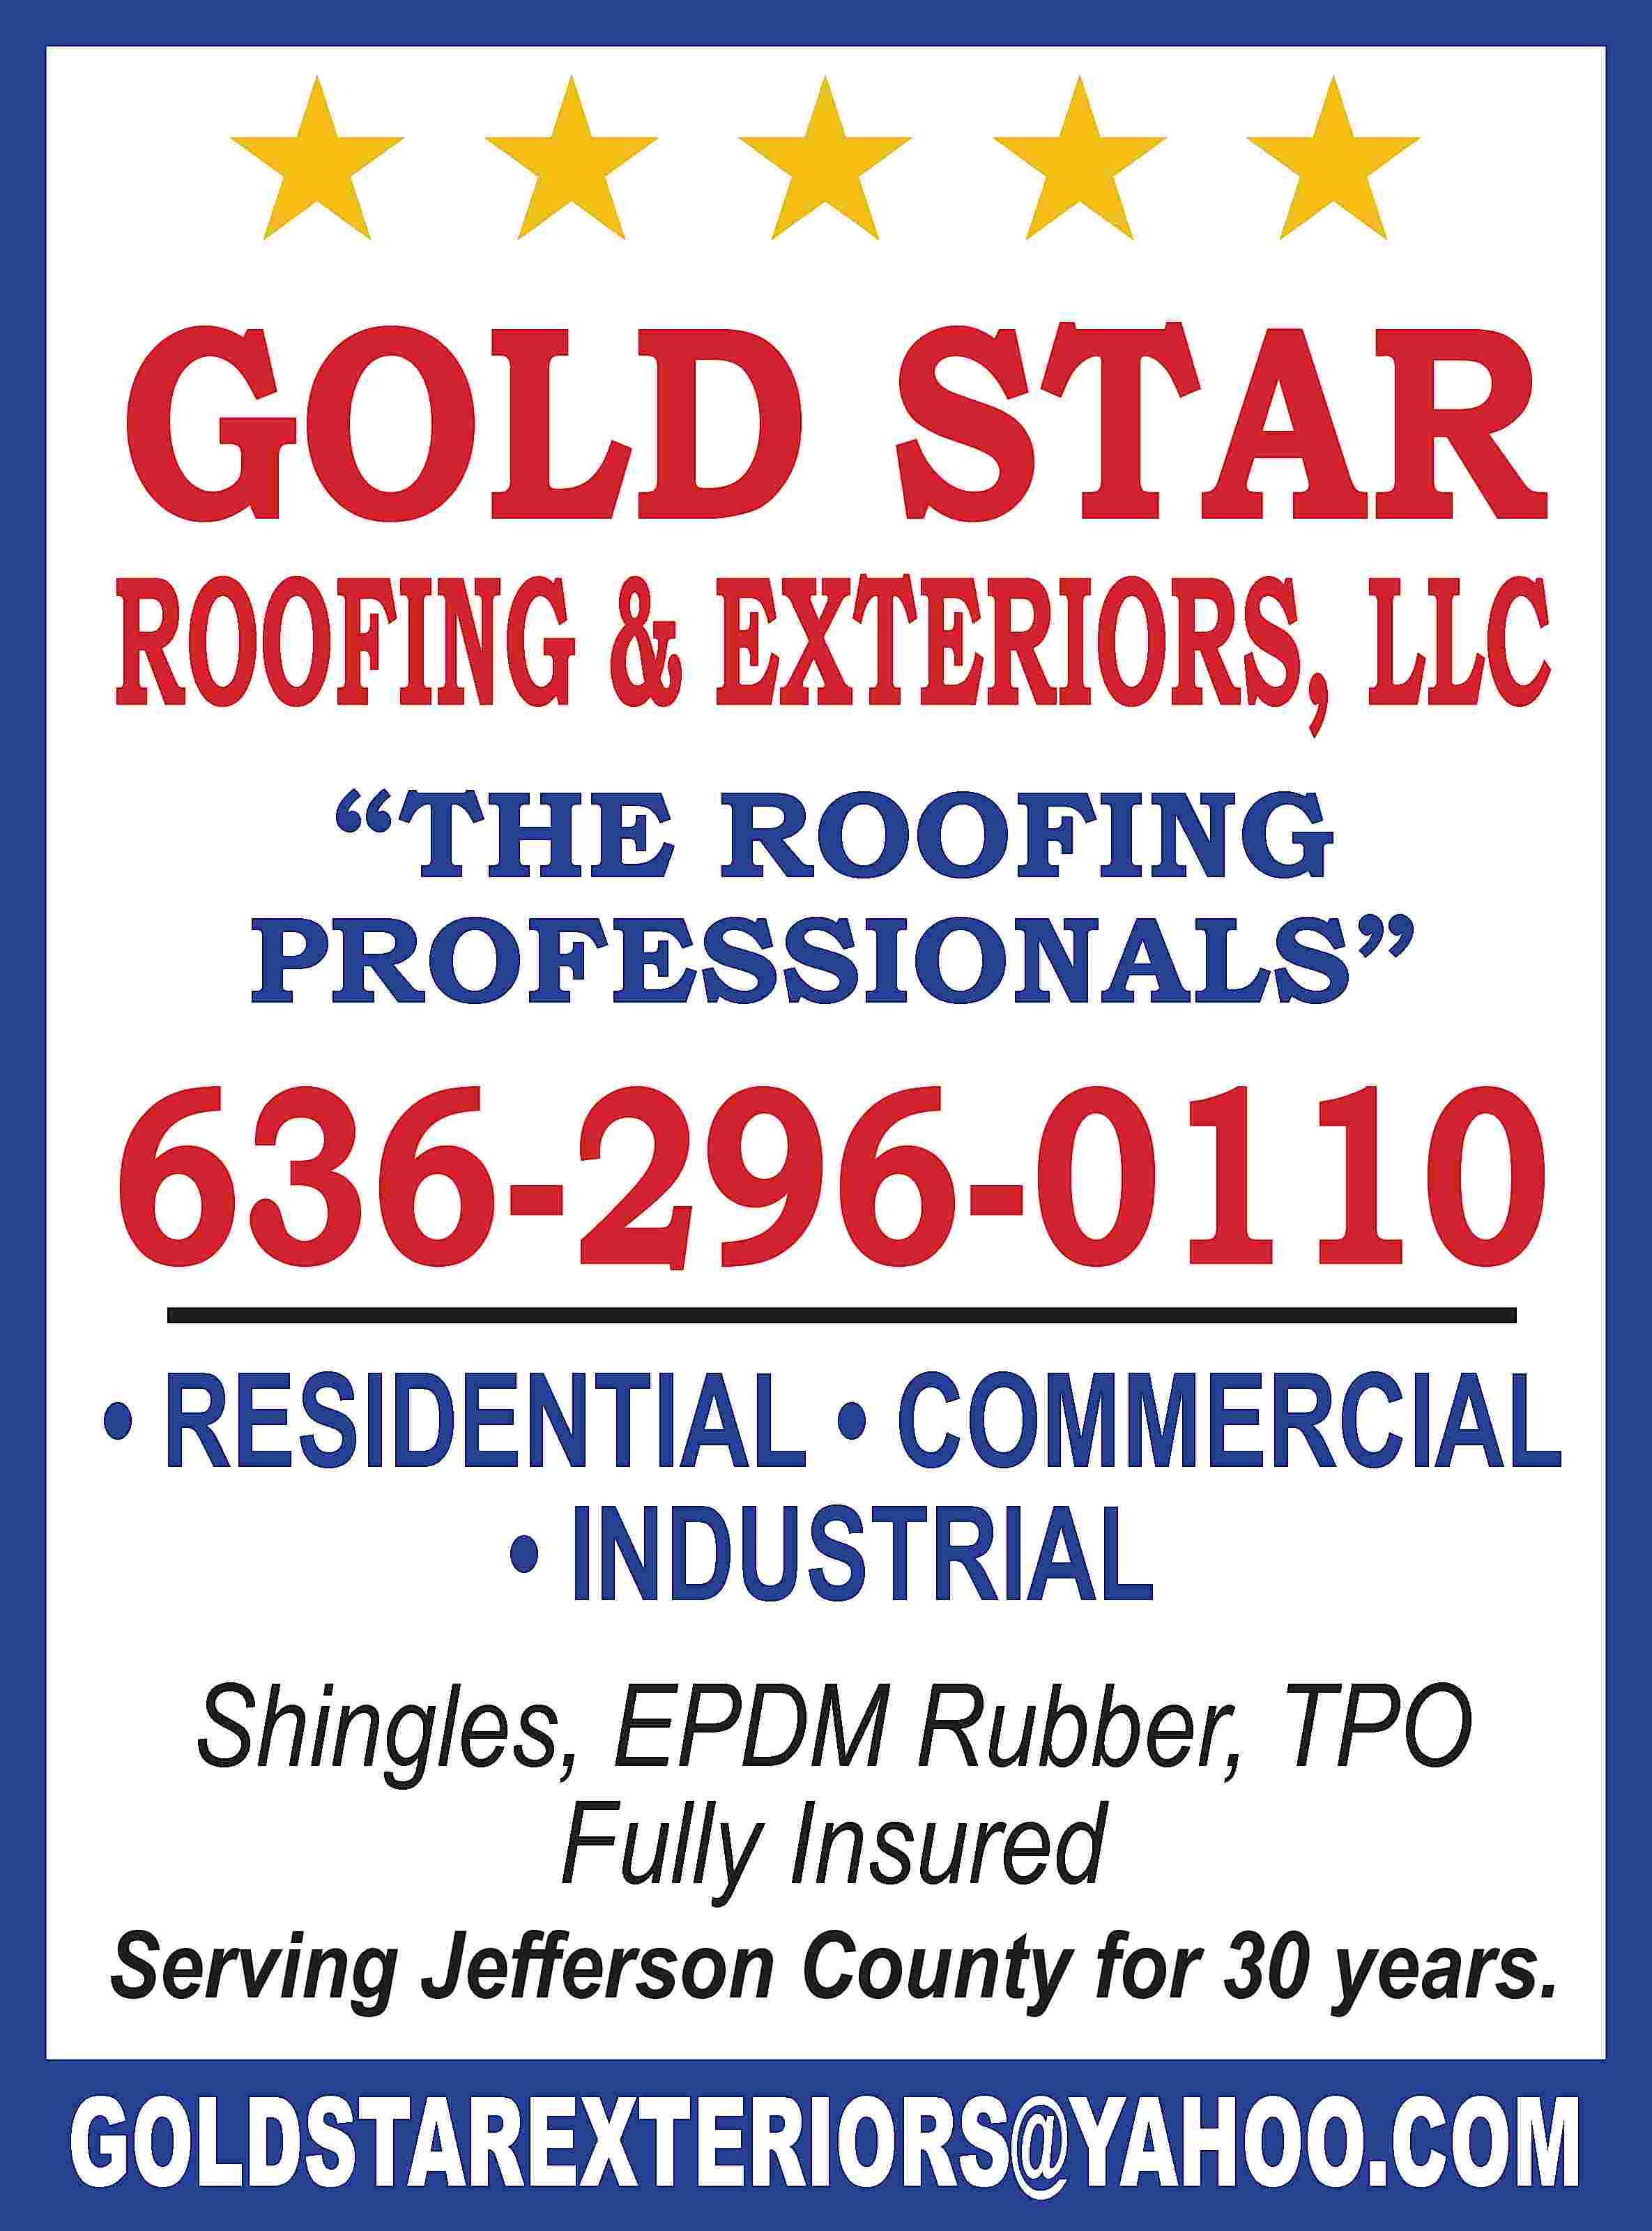 HHHHH GOLD STAR ROOFING &  HHHHH GOLD STAR ROOFING & EXTERIORS, LLC “THE ROOFING PROFESSIONALS” 636-296-0110 • RESIDENTIAL • COMMERCIAL • INDUSTRIAL Shingles, EPDM Rubber, TPO Fully Insured Serving Jefferson County for 30 years. GOLDSTAREXTERIORS@YAHOO.COM